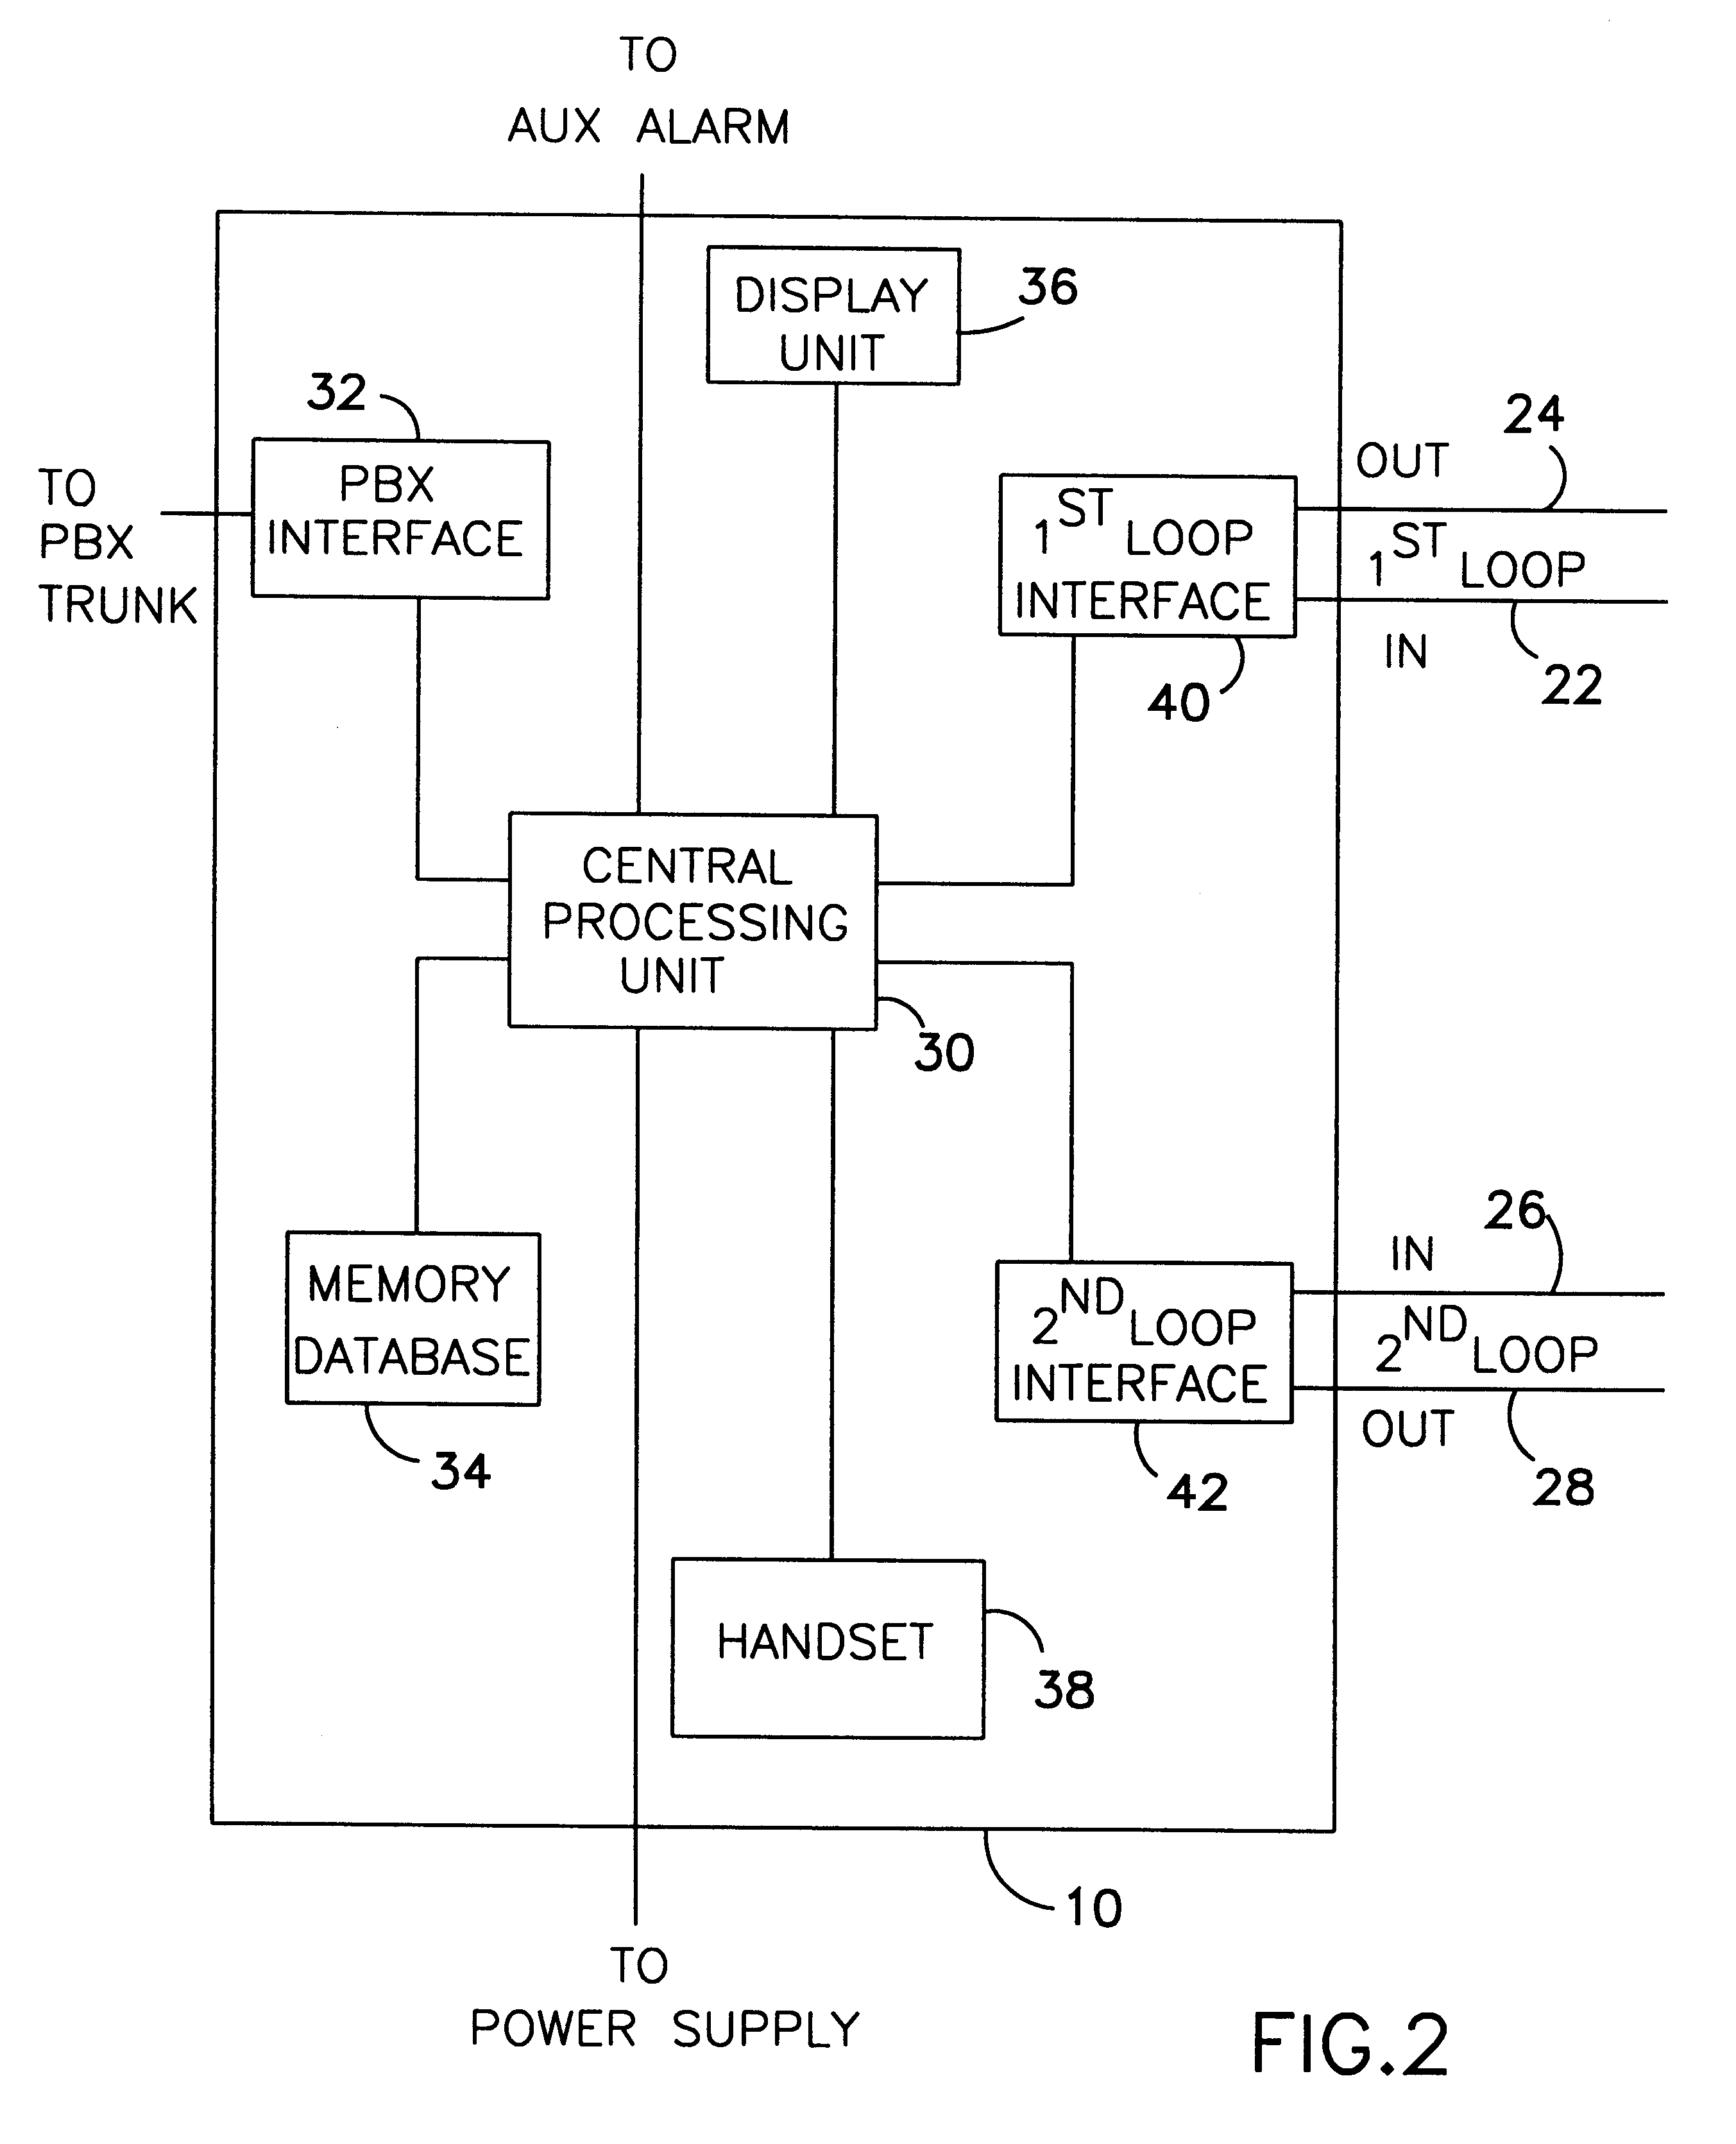 Interfacing device to be used with a telephone system terminal for transmitting extended station information to a public safety answering point